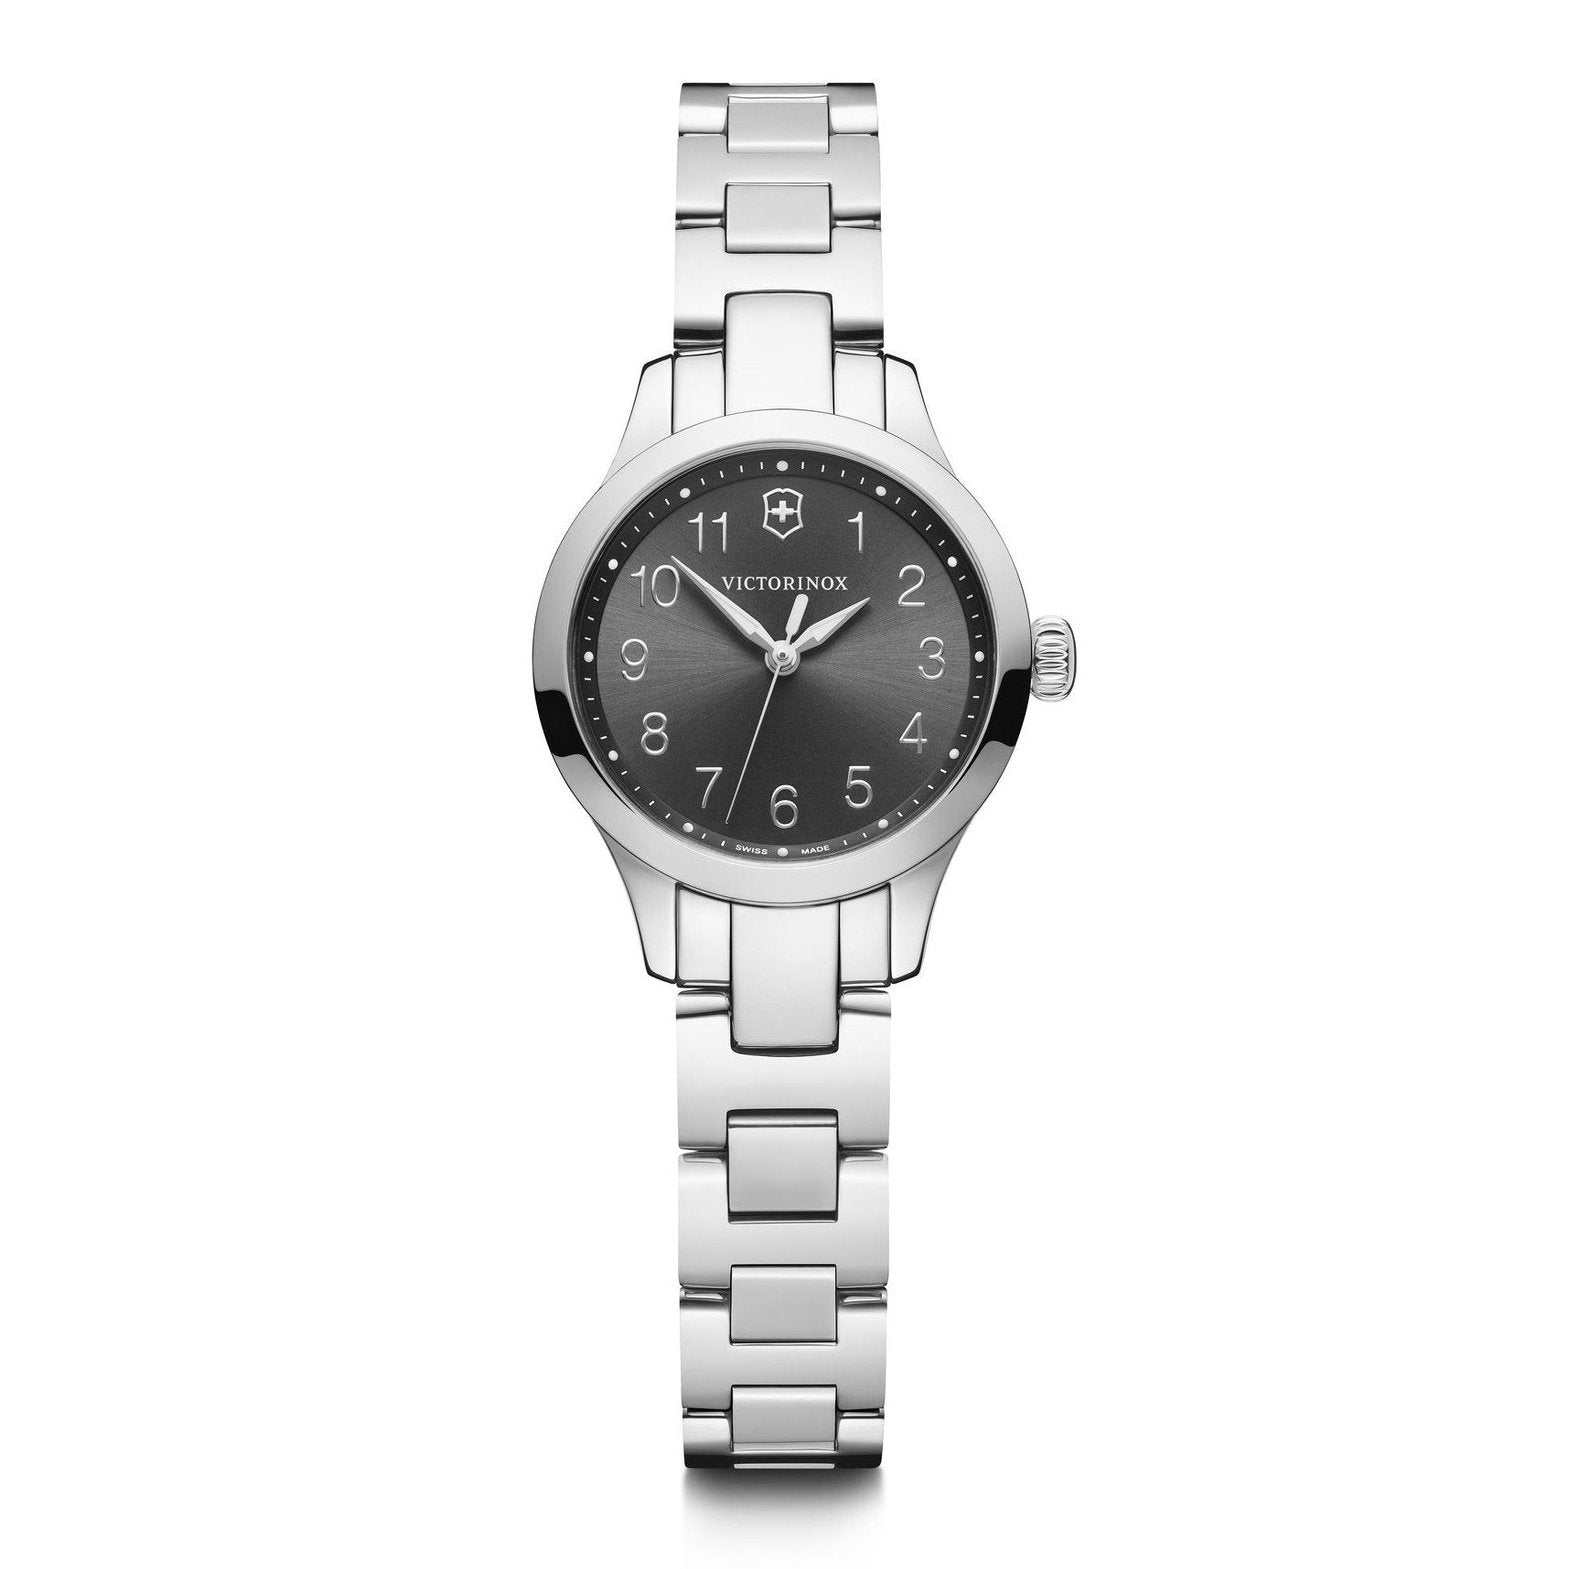 Victorinox Swiss Army Watches For Men and Women | Shop Online Now 